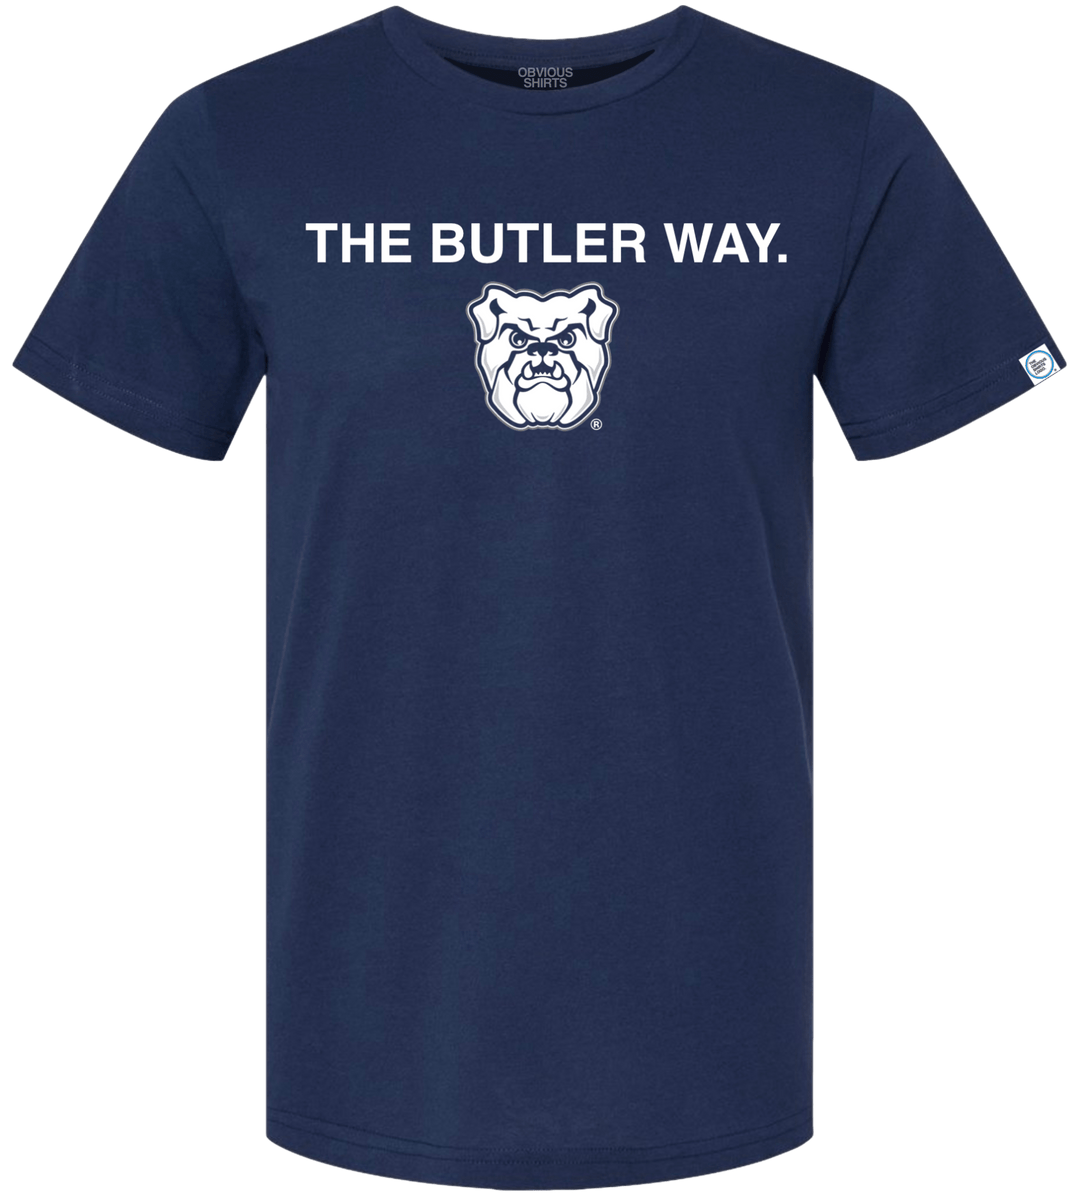 THE BUTLER WAY. - OBVIOUS SHIRTS